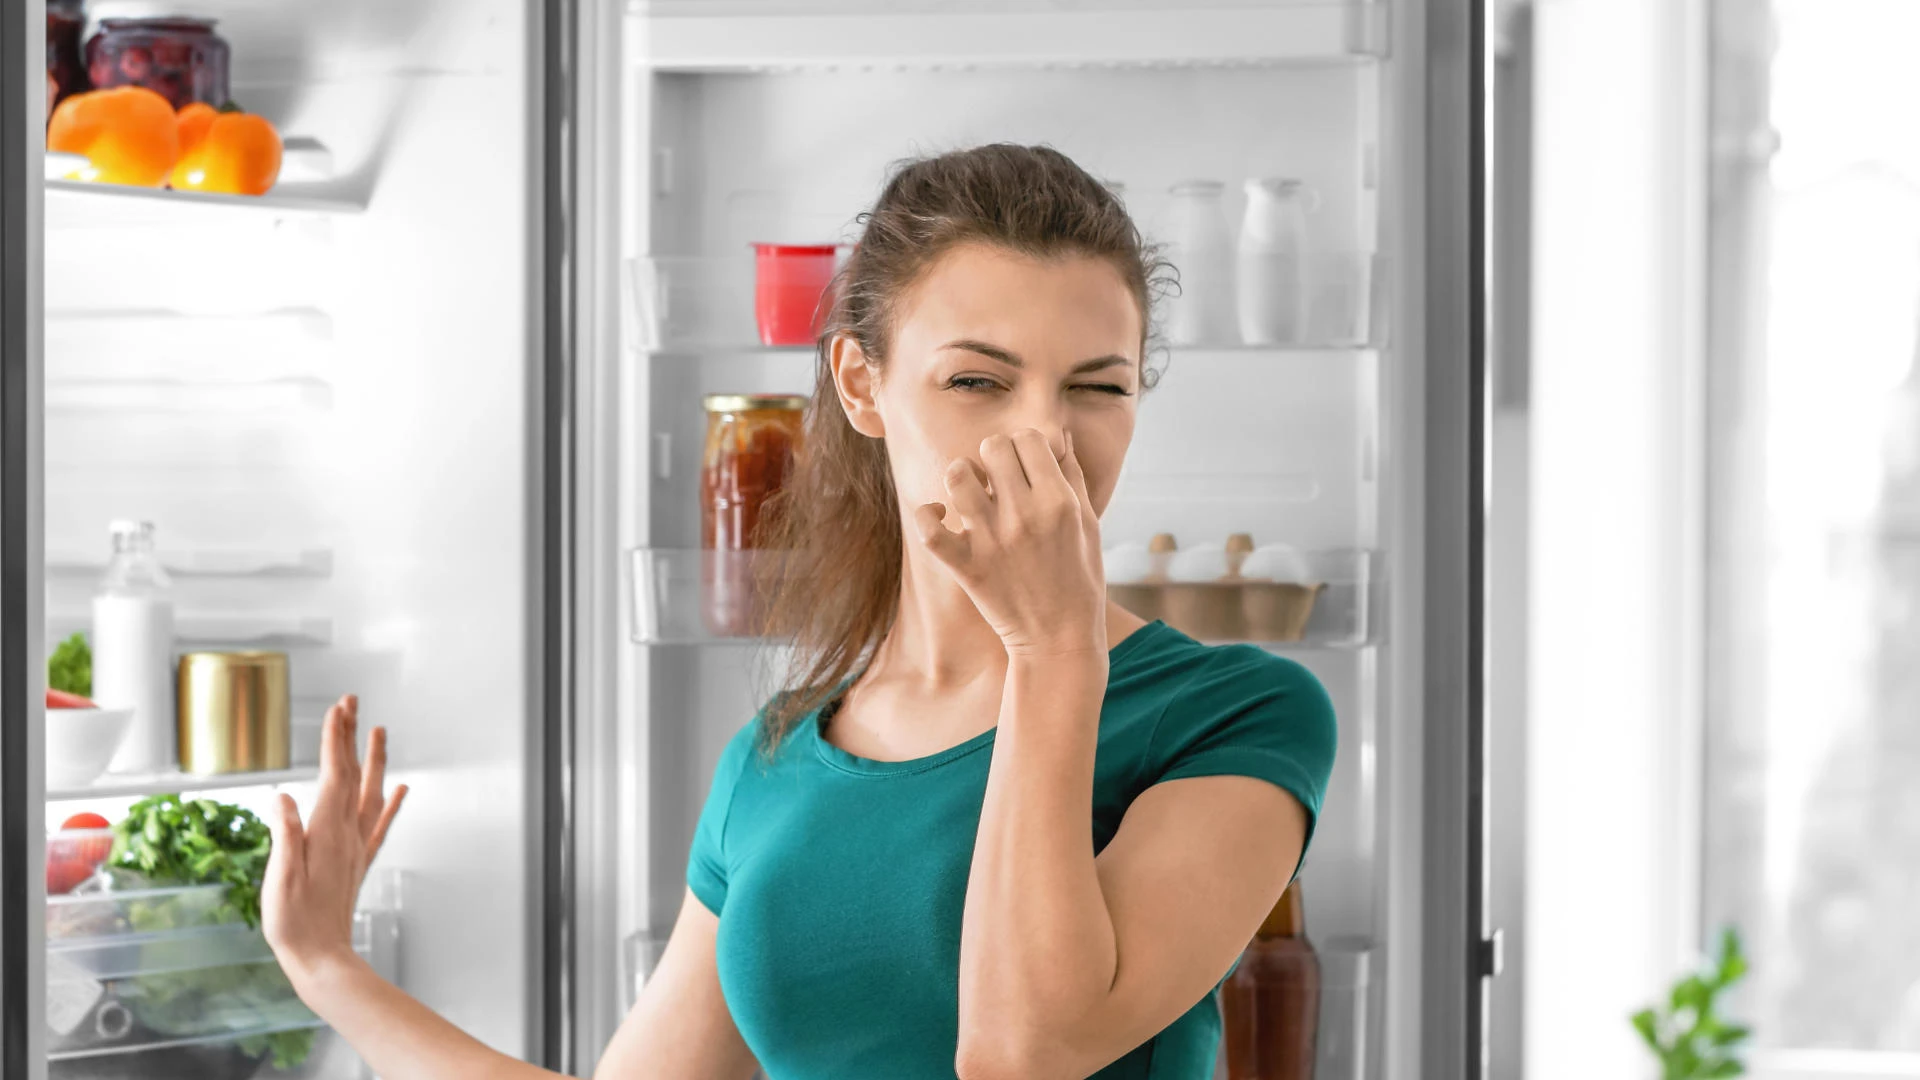 How to Remove Odor From a Refrigerator